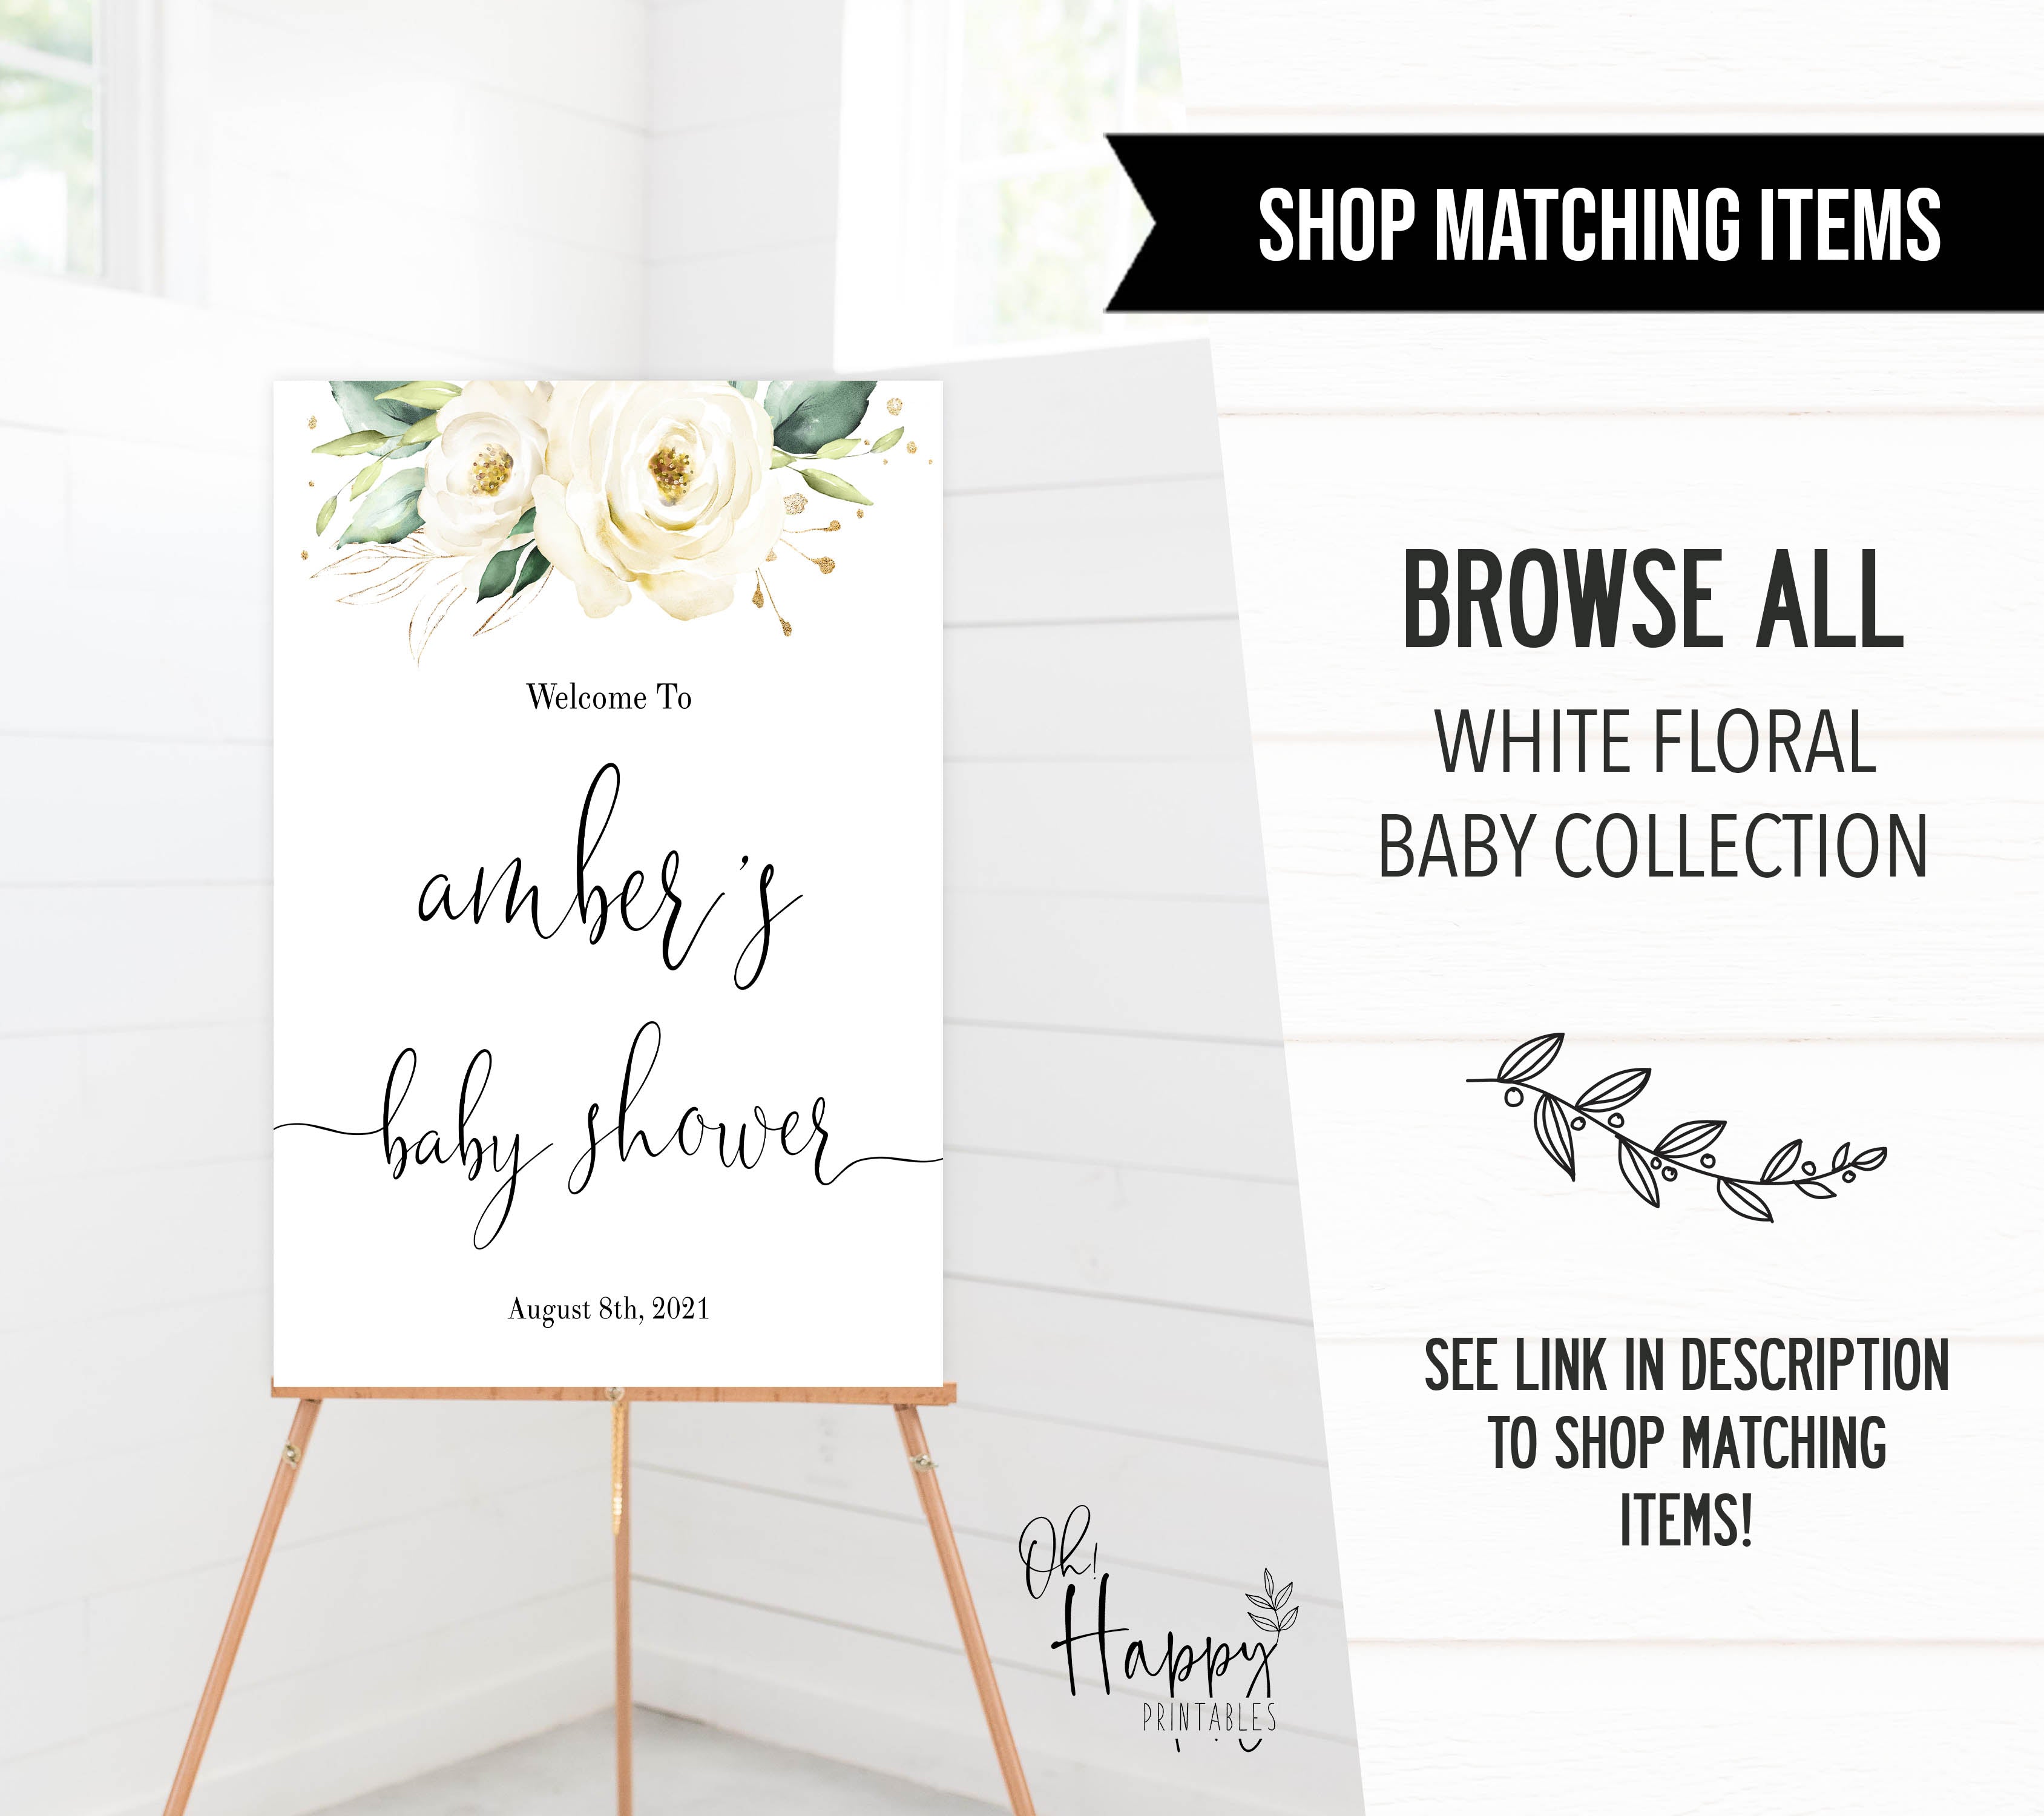 what am I baby game, Printable baby shower games, shite floral baby games, baby shower games, fun baby shower ideas, top baby shower ideas, floral baby shower, baby shower games, fun floral baby shower ideas